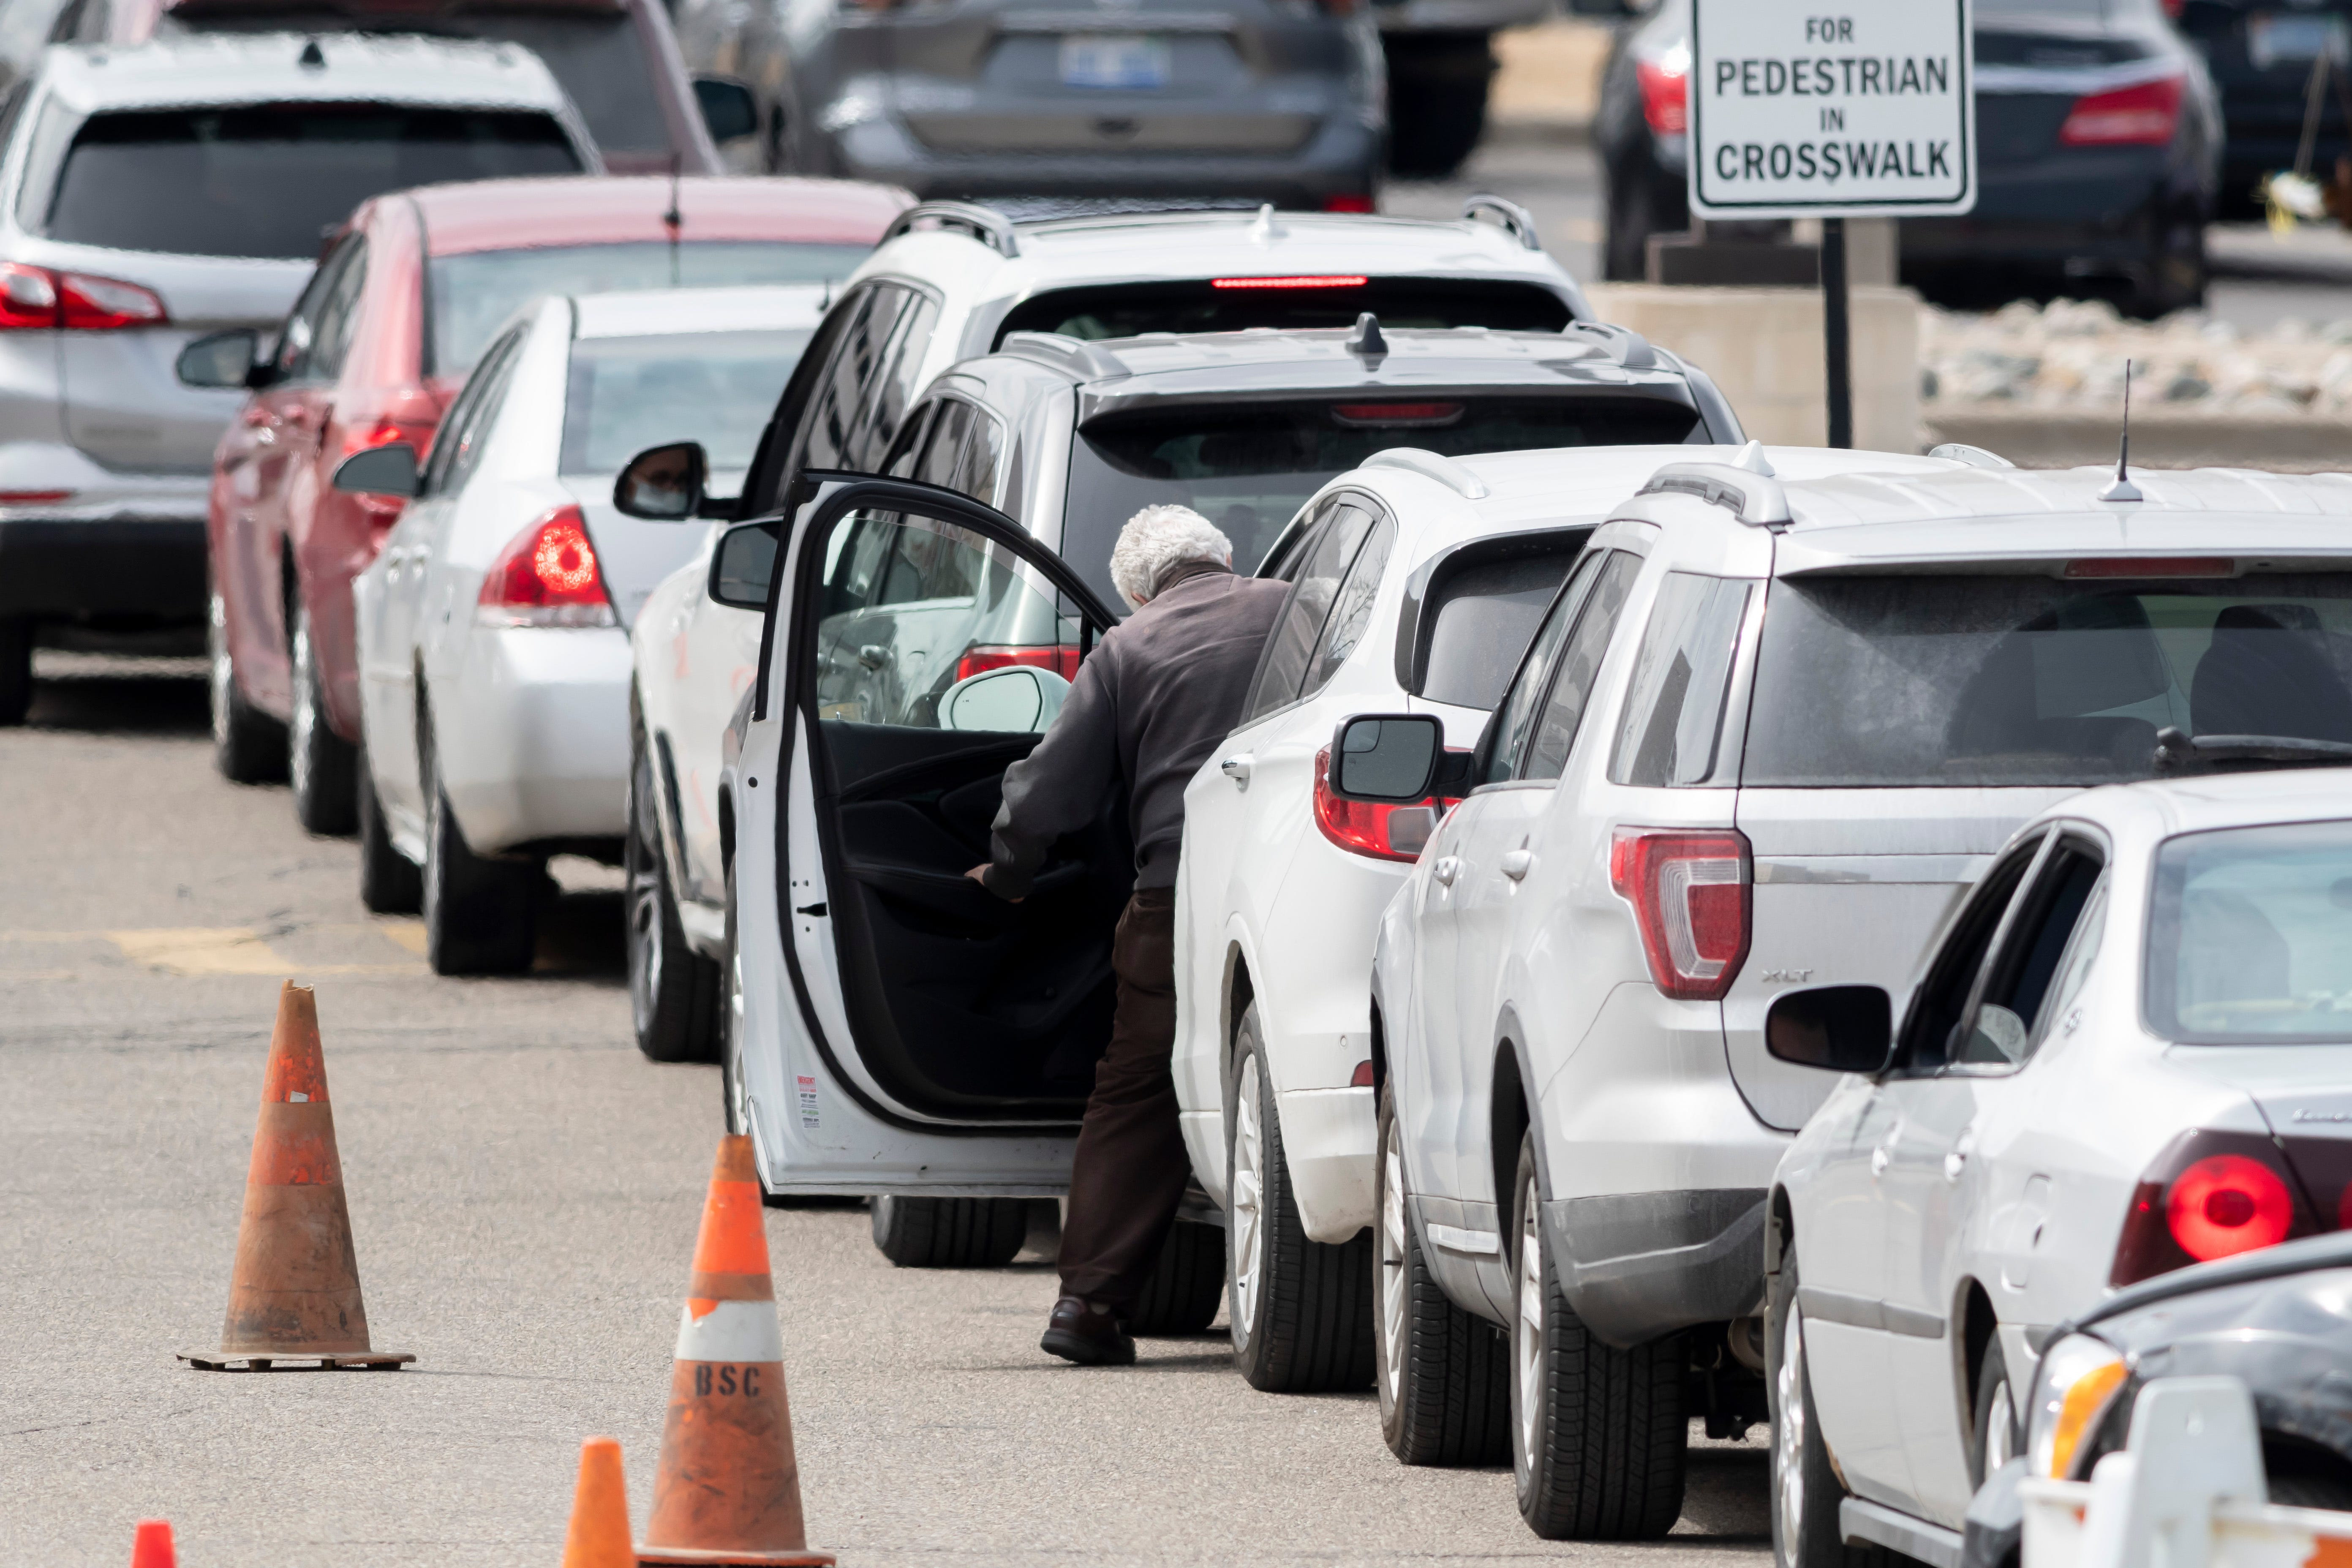 Dozens of cars wait in line during a drive-up screening process at Beaumont hospital in Royal Oak, March 16, 2020. Members of the public concerned that they may be infected with the coronavirus were able to get screening done from their vehicles.